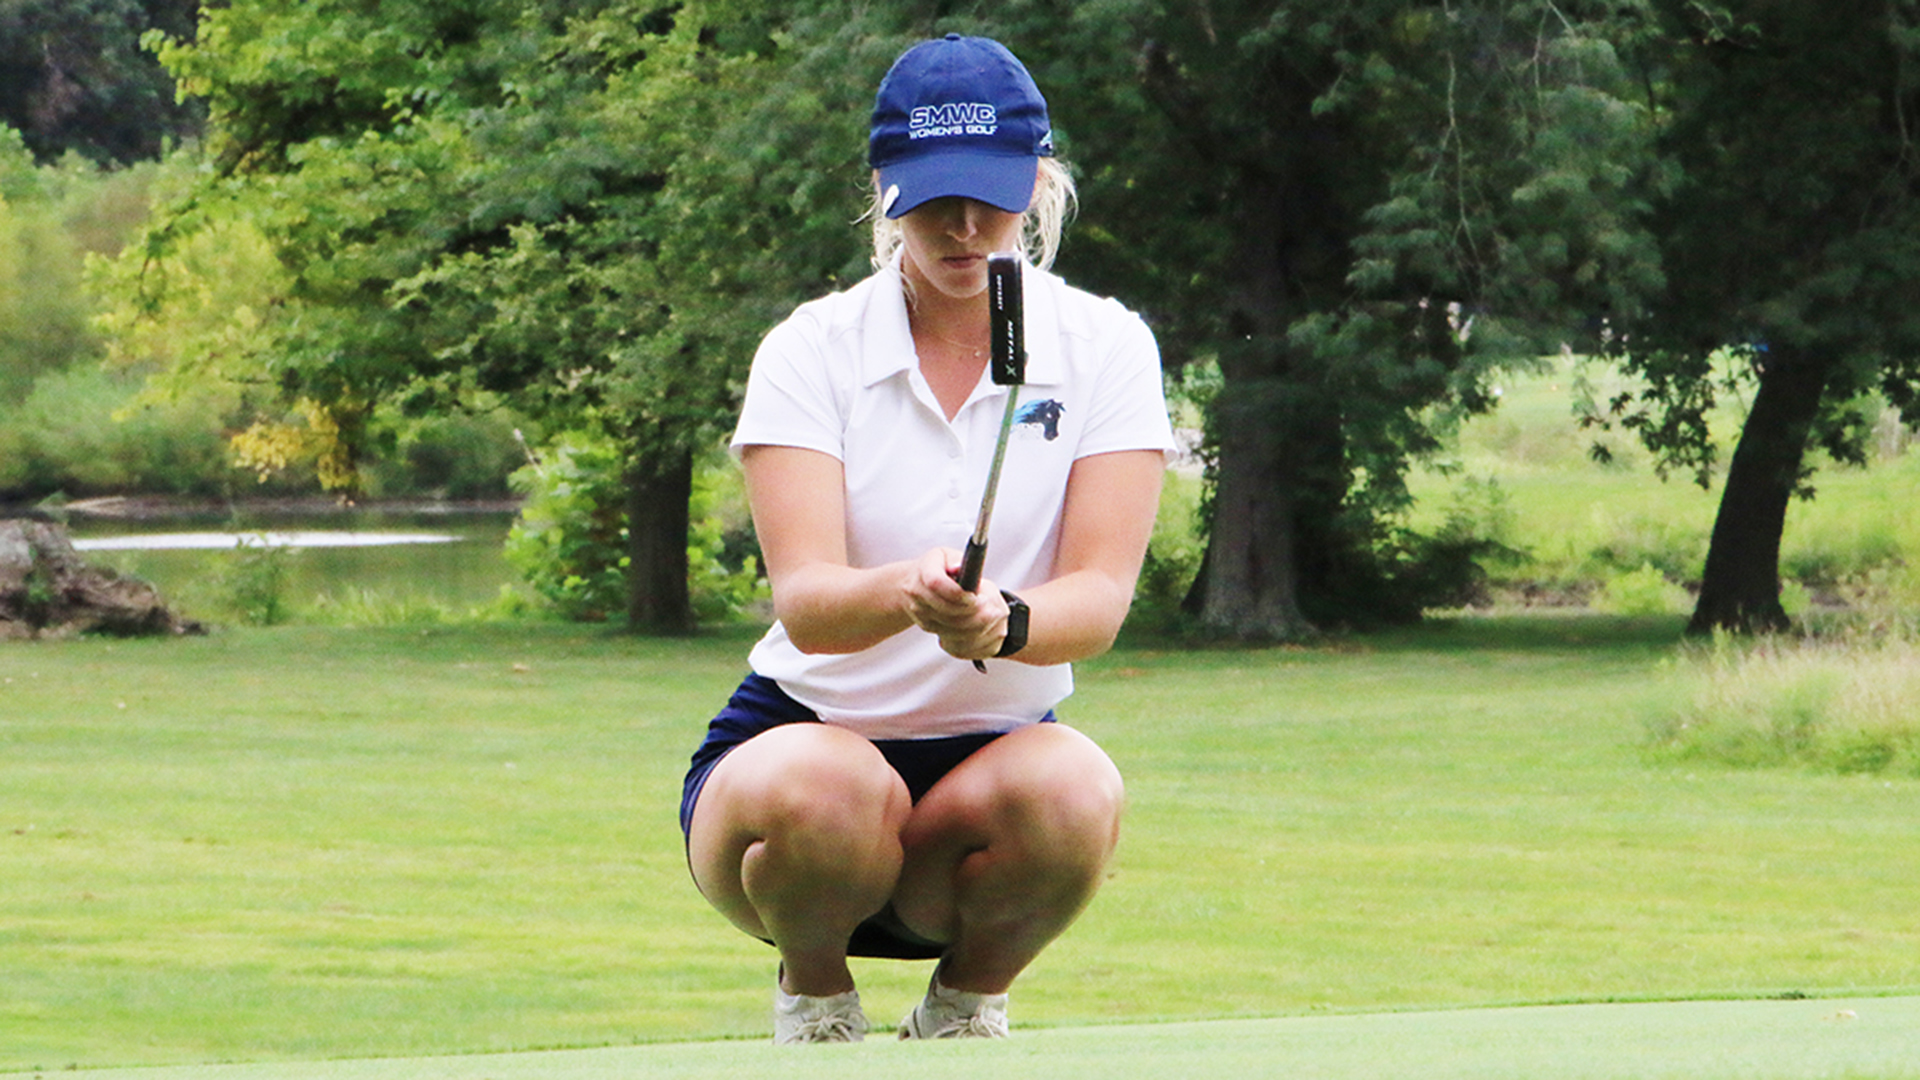 Renae Jaeger moved up nine spots on the leaderboard into fifth place after firing a 7-over 79 on Monday.